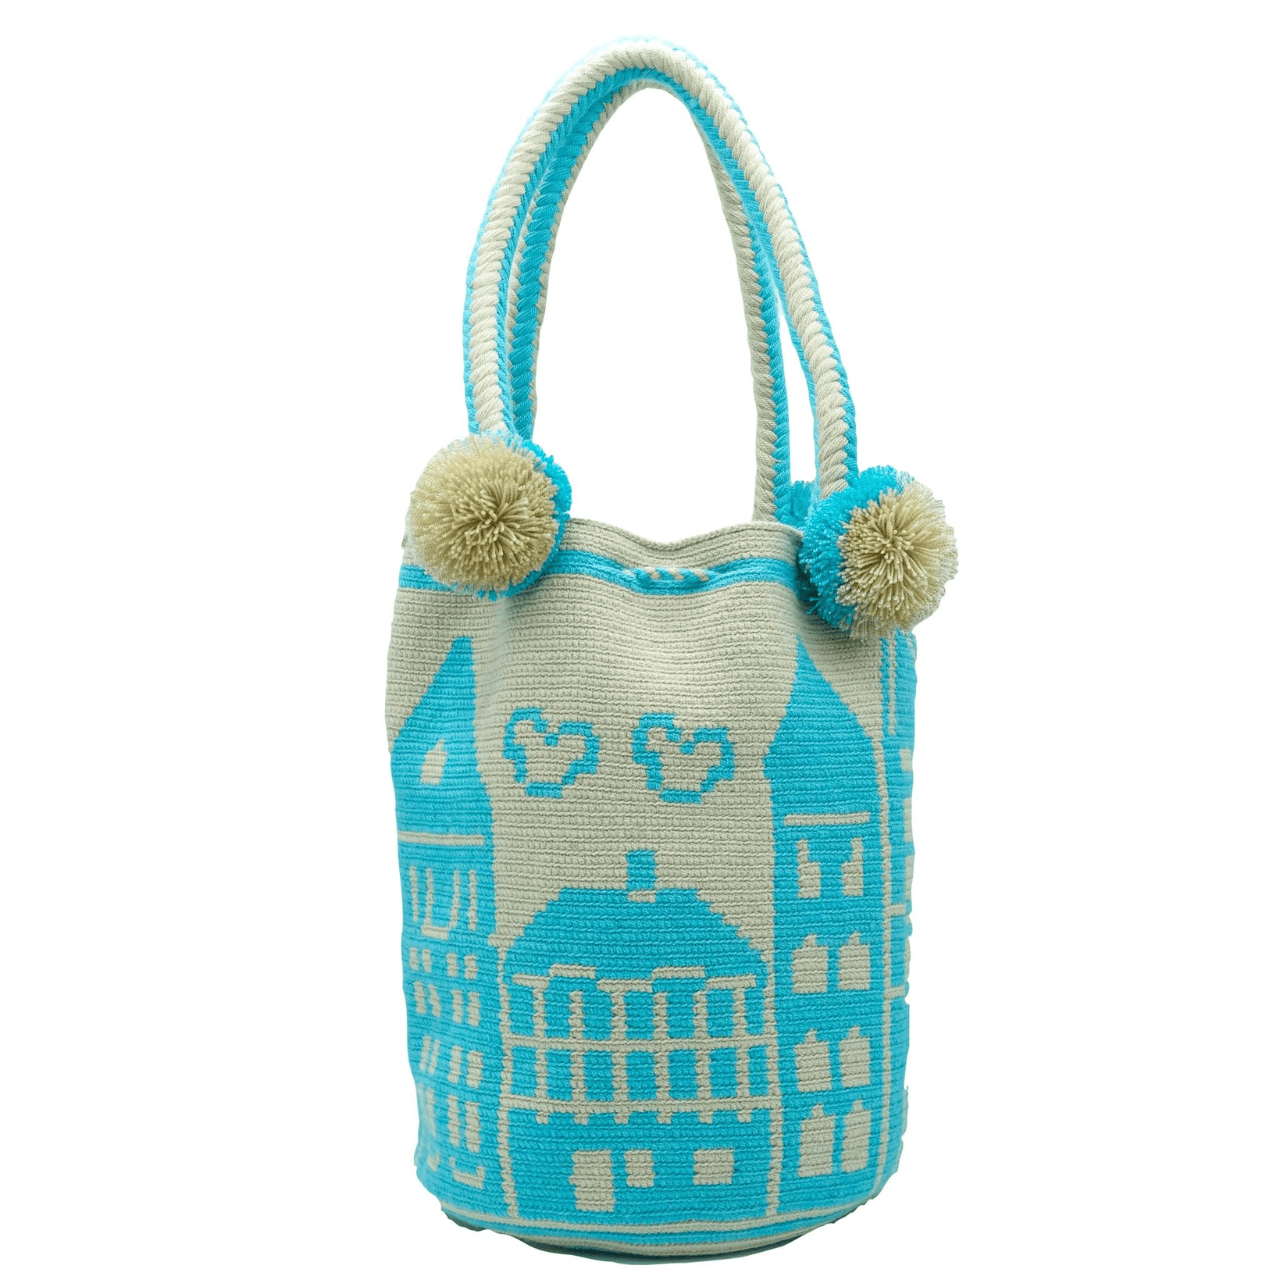 Gala Crochet Tote Bag - Unique Wayuu Style, Inspired by La Guajira, Colombia. Aqua and Beige Colors with Pom Poms. Handcrafted by Expert Wayuu Women Artisans. Large Size, Sturdy & Stylish.